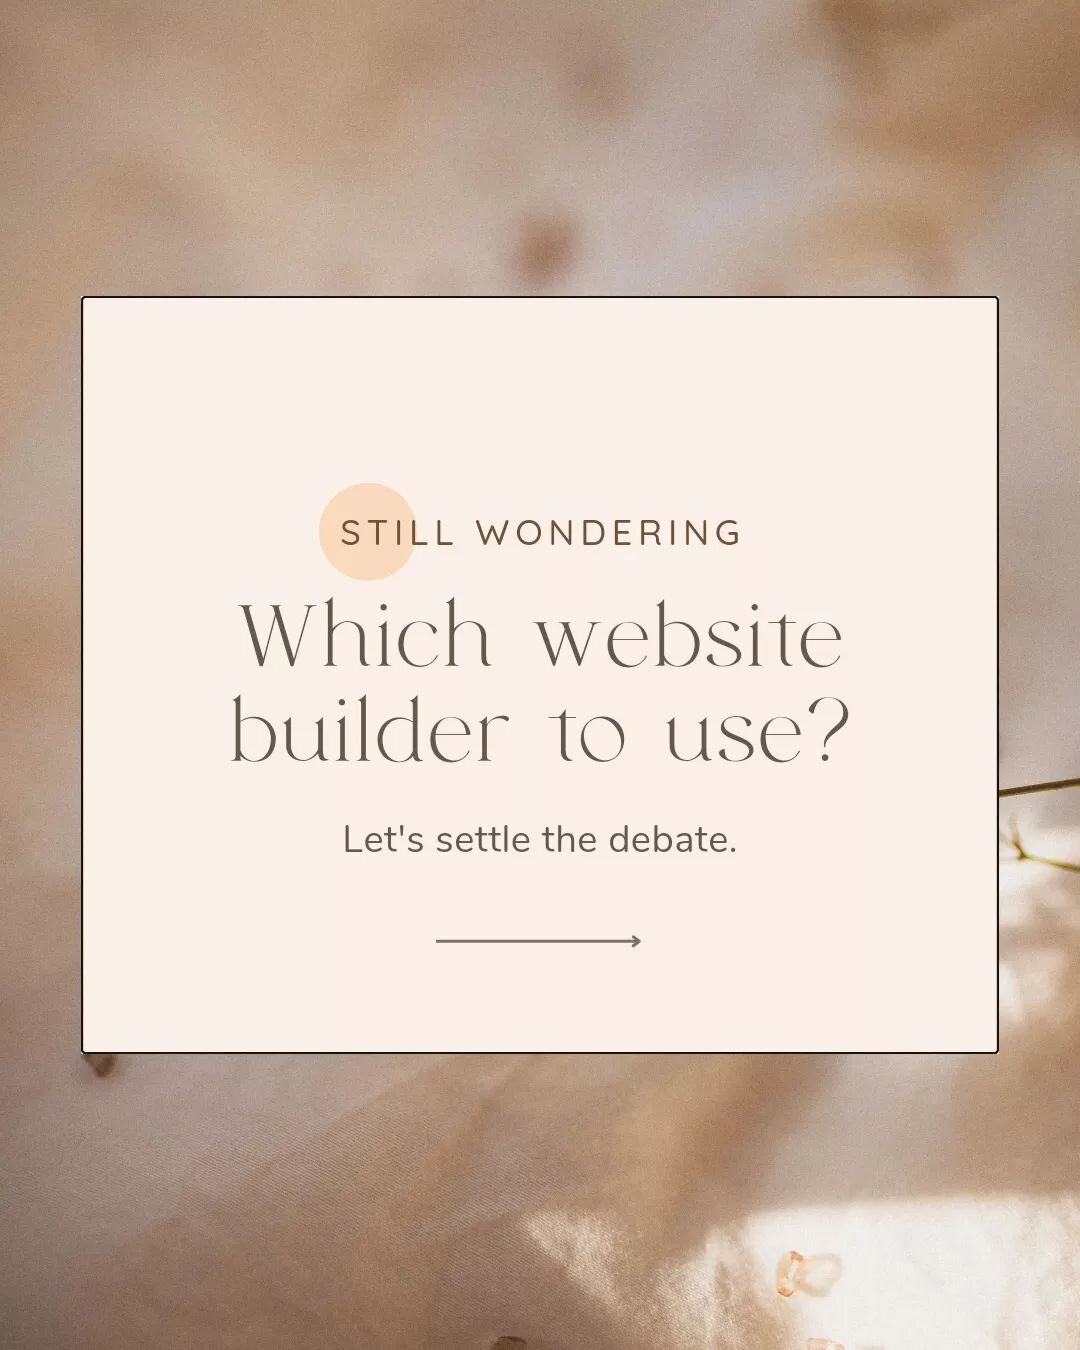 ✨What's the best website platform or website builder for my business?✨

Great question and honestly most designer will propobably recommend their favs.

I don't think that's the best solution - so here is my quick take on the besties:

For bloggers =